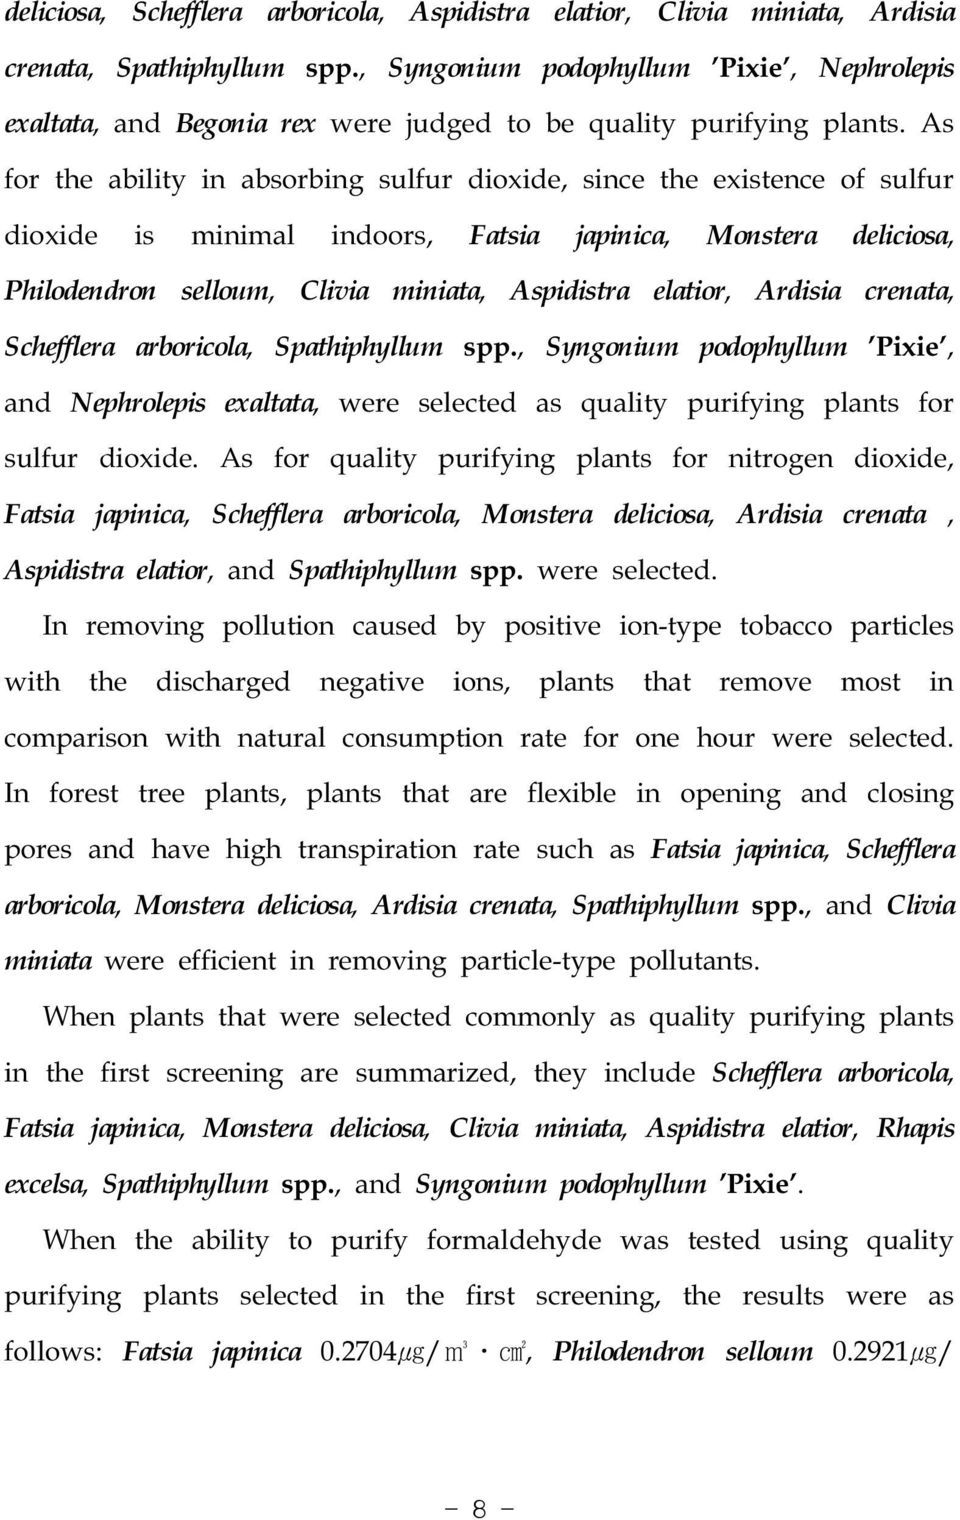 As for the ability in absorbing sulfur dioxide, since the existence of sulfur dioxide is minimal indoors, Fatsia japinica, Monstera deliciosa, Philodendron selloum, Clivia miniata, Aspidistra